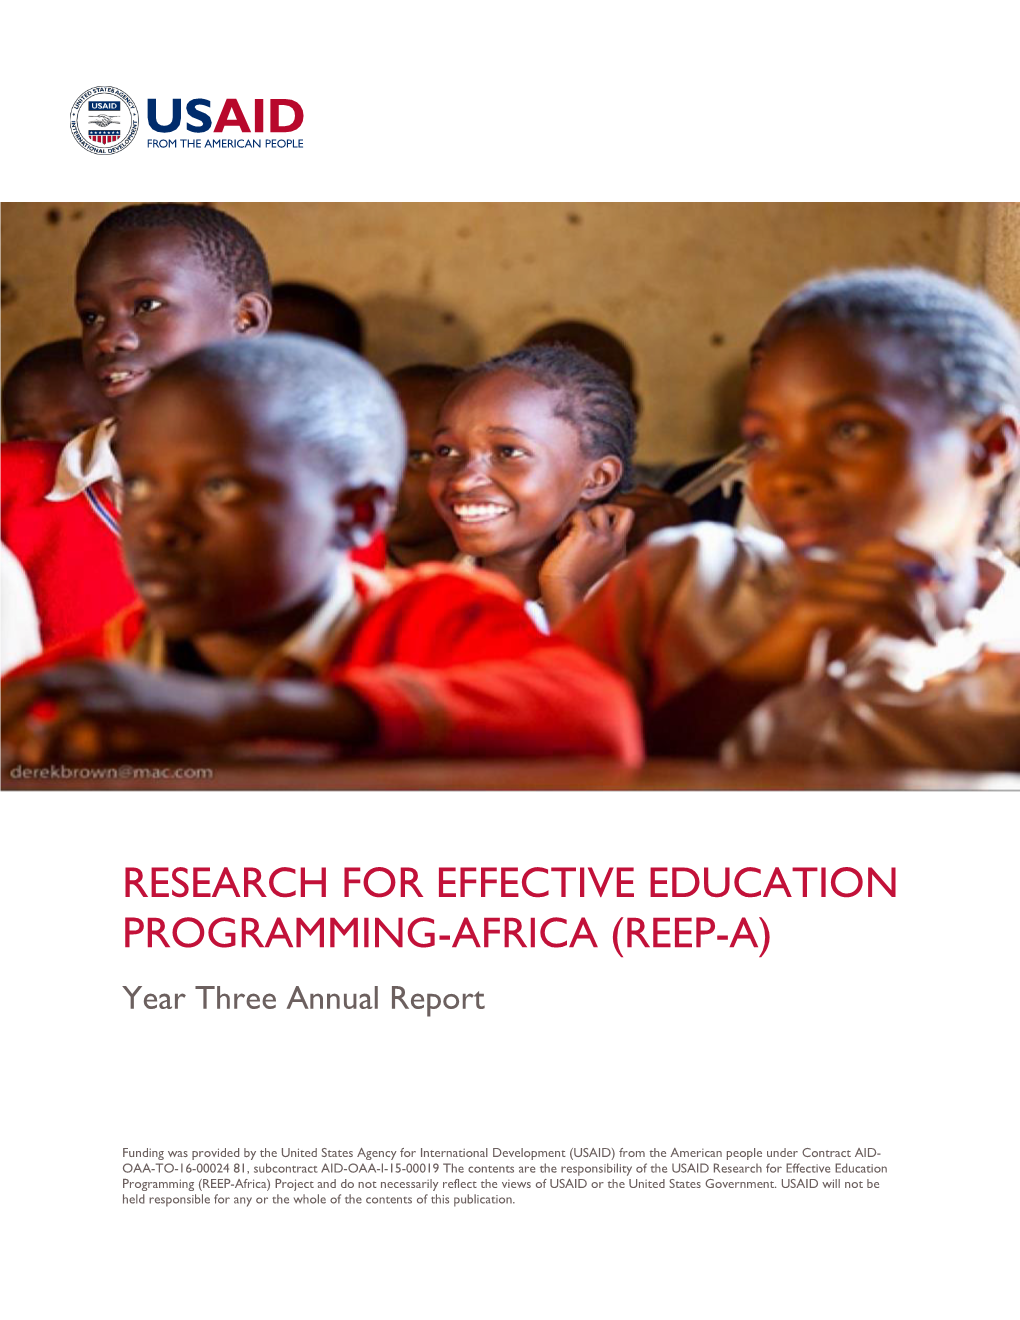 RESEARCH for EFFECTIVE EDUCATION PROGRAMMING-AFRICA (REEP-A) Year Three Annual Report